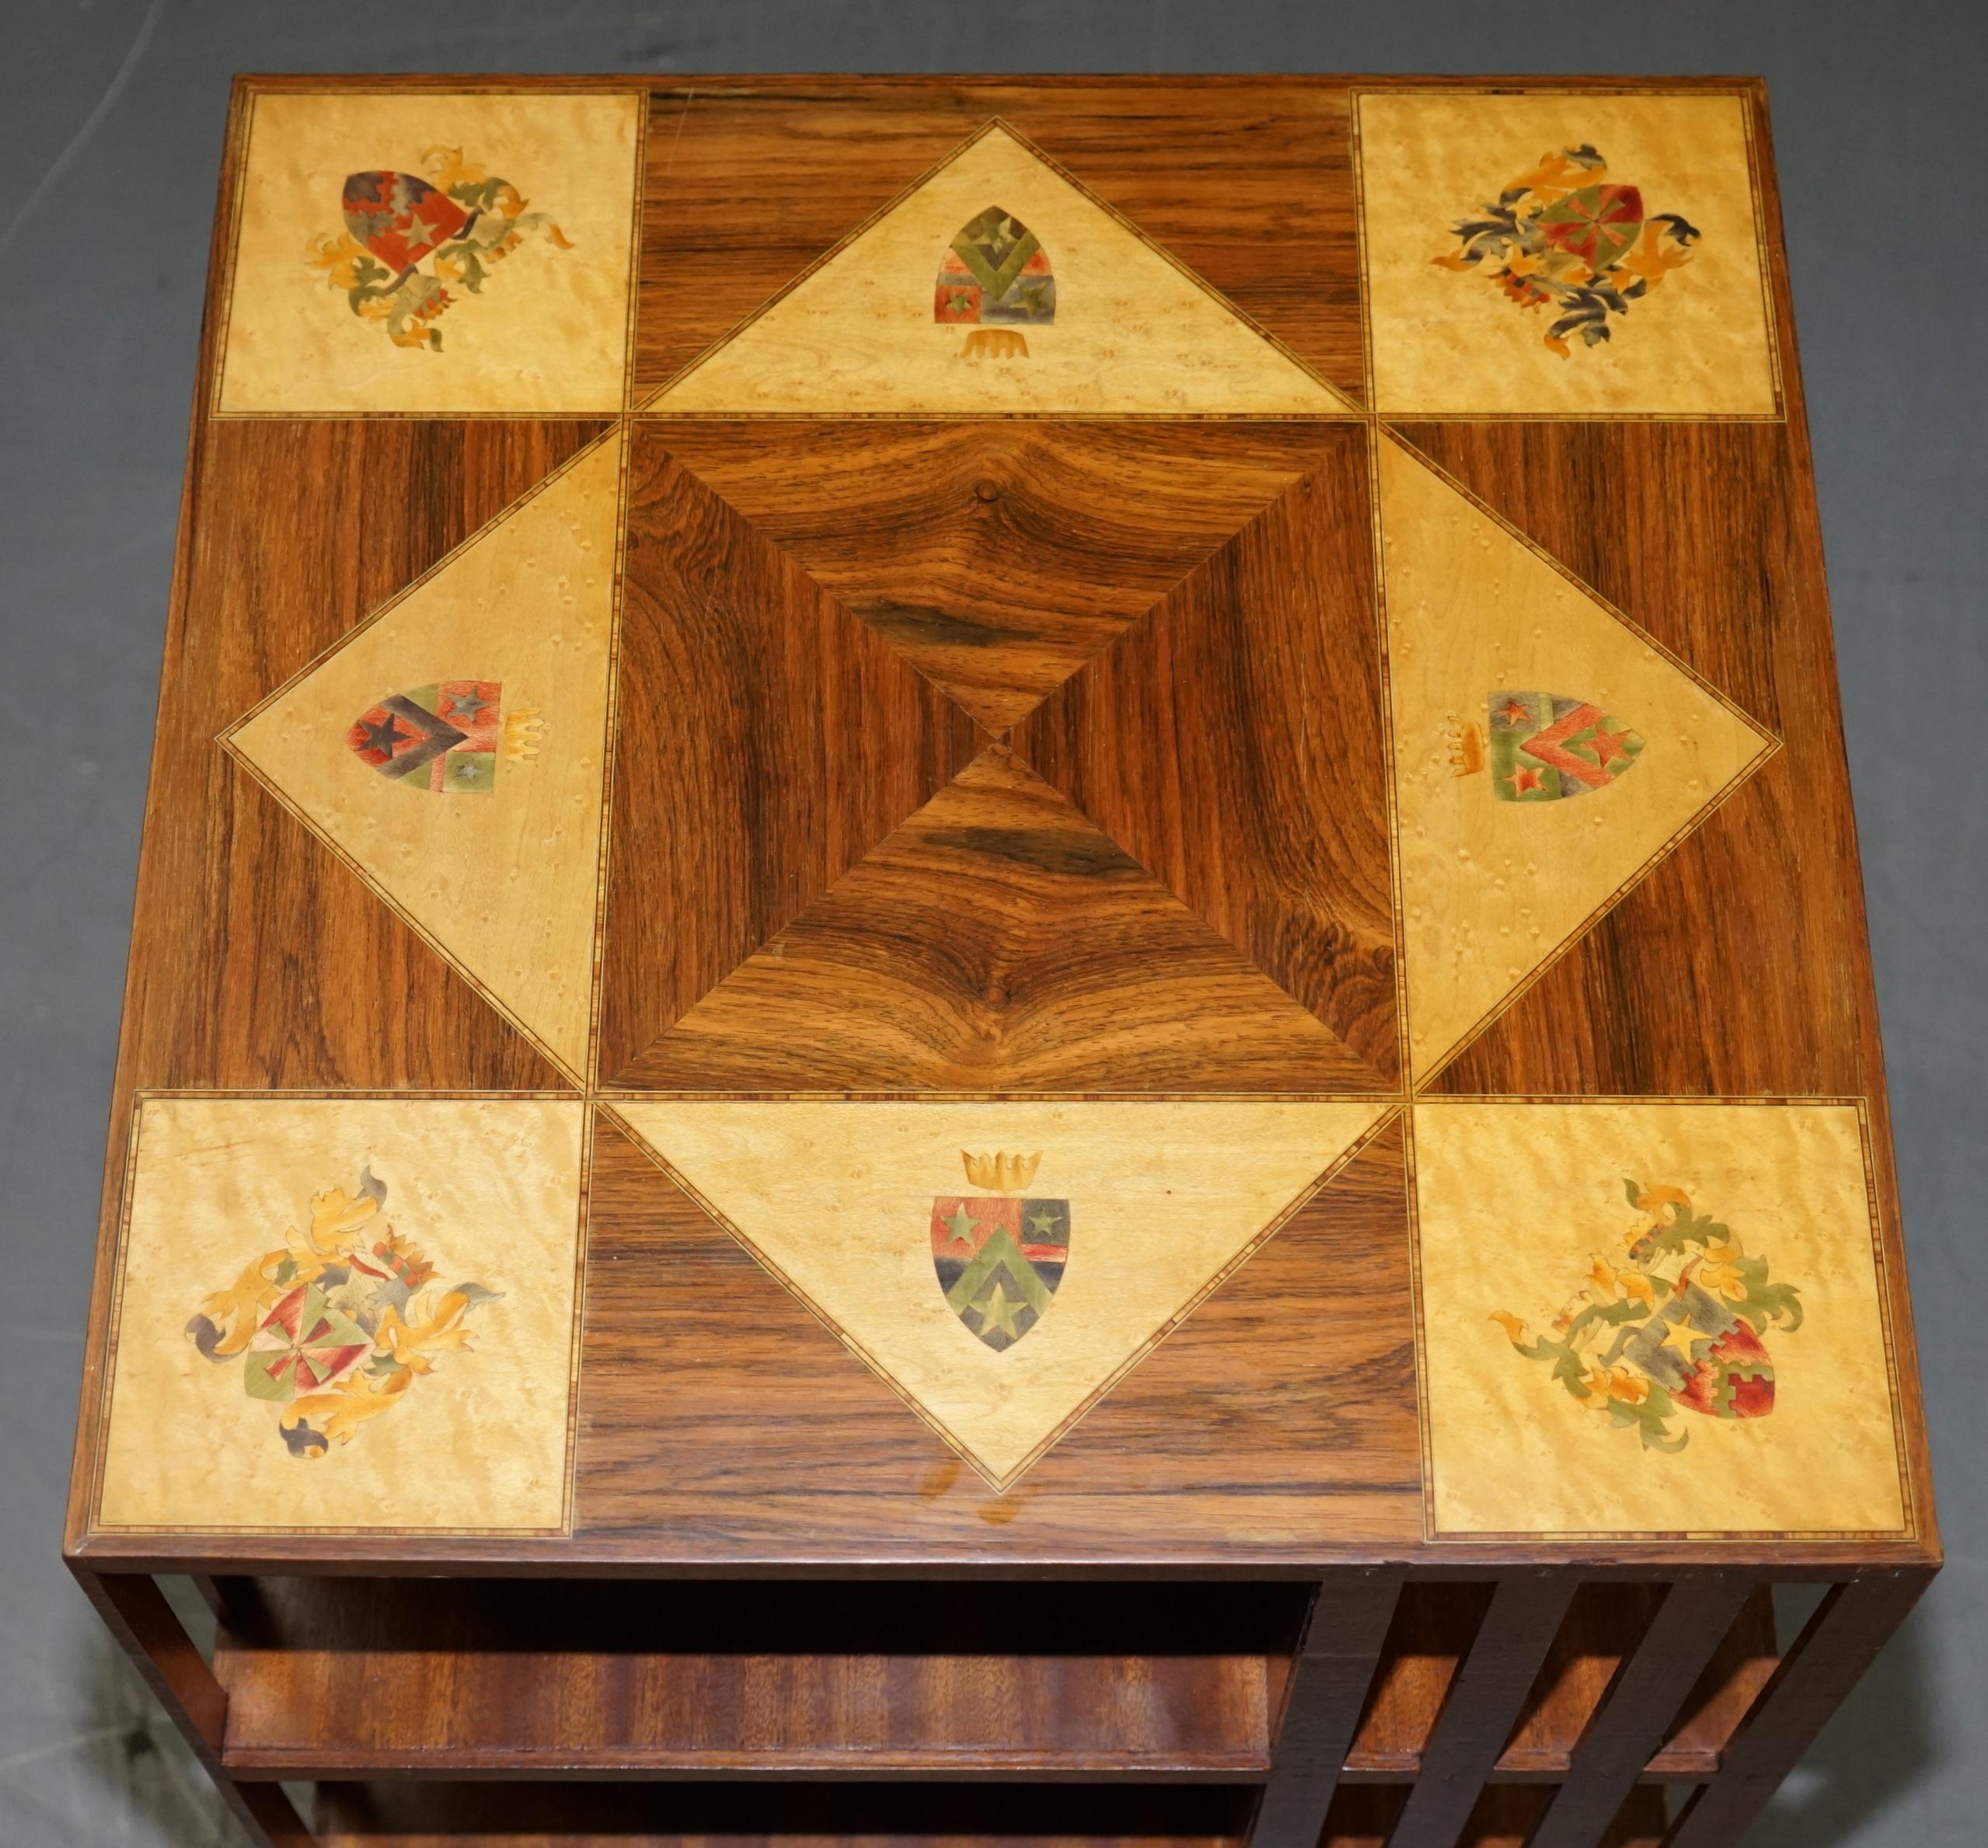 We are delighted to offer this stunning vintage Library bookcases inlaid with Royal Armorial cresting 

This is a real decorator’s piece, I have never seen a revolving bookcase with marquetry inlay before and any piece of furniture with armorial